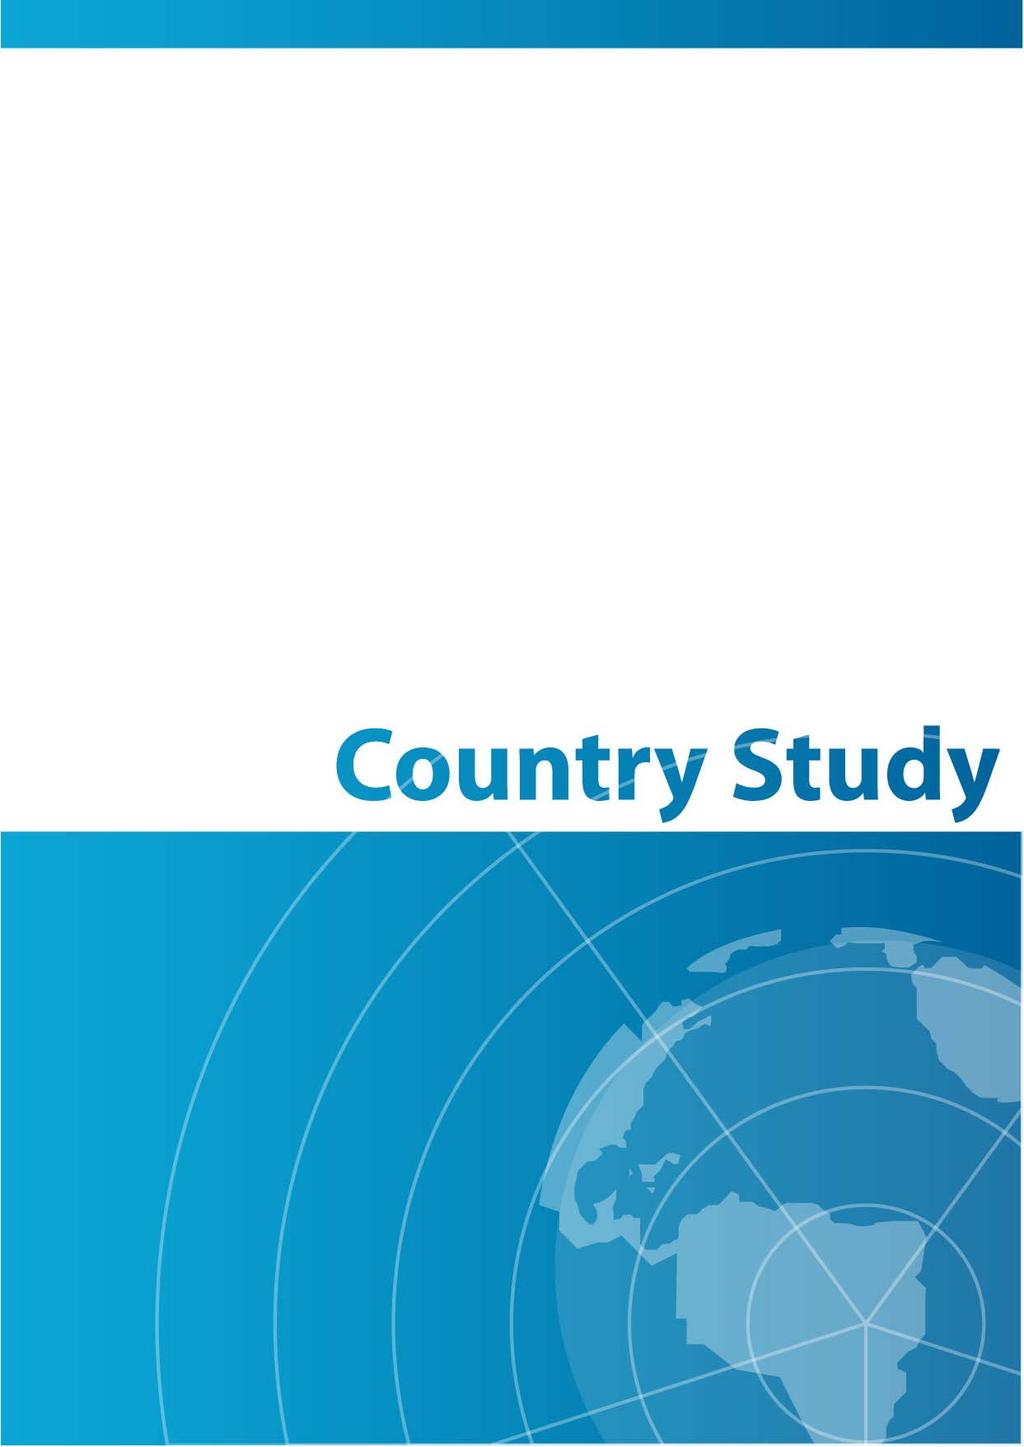 Country Study number 22 June, 2011 THE FOOD SECURITY POLICY CONTEXT IN BRAZIL Danuta Chmielewska